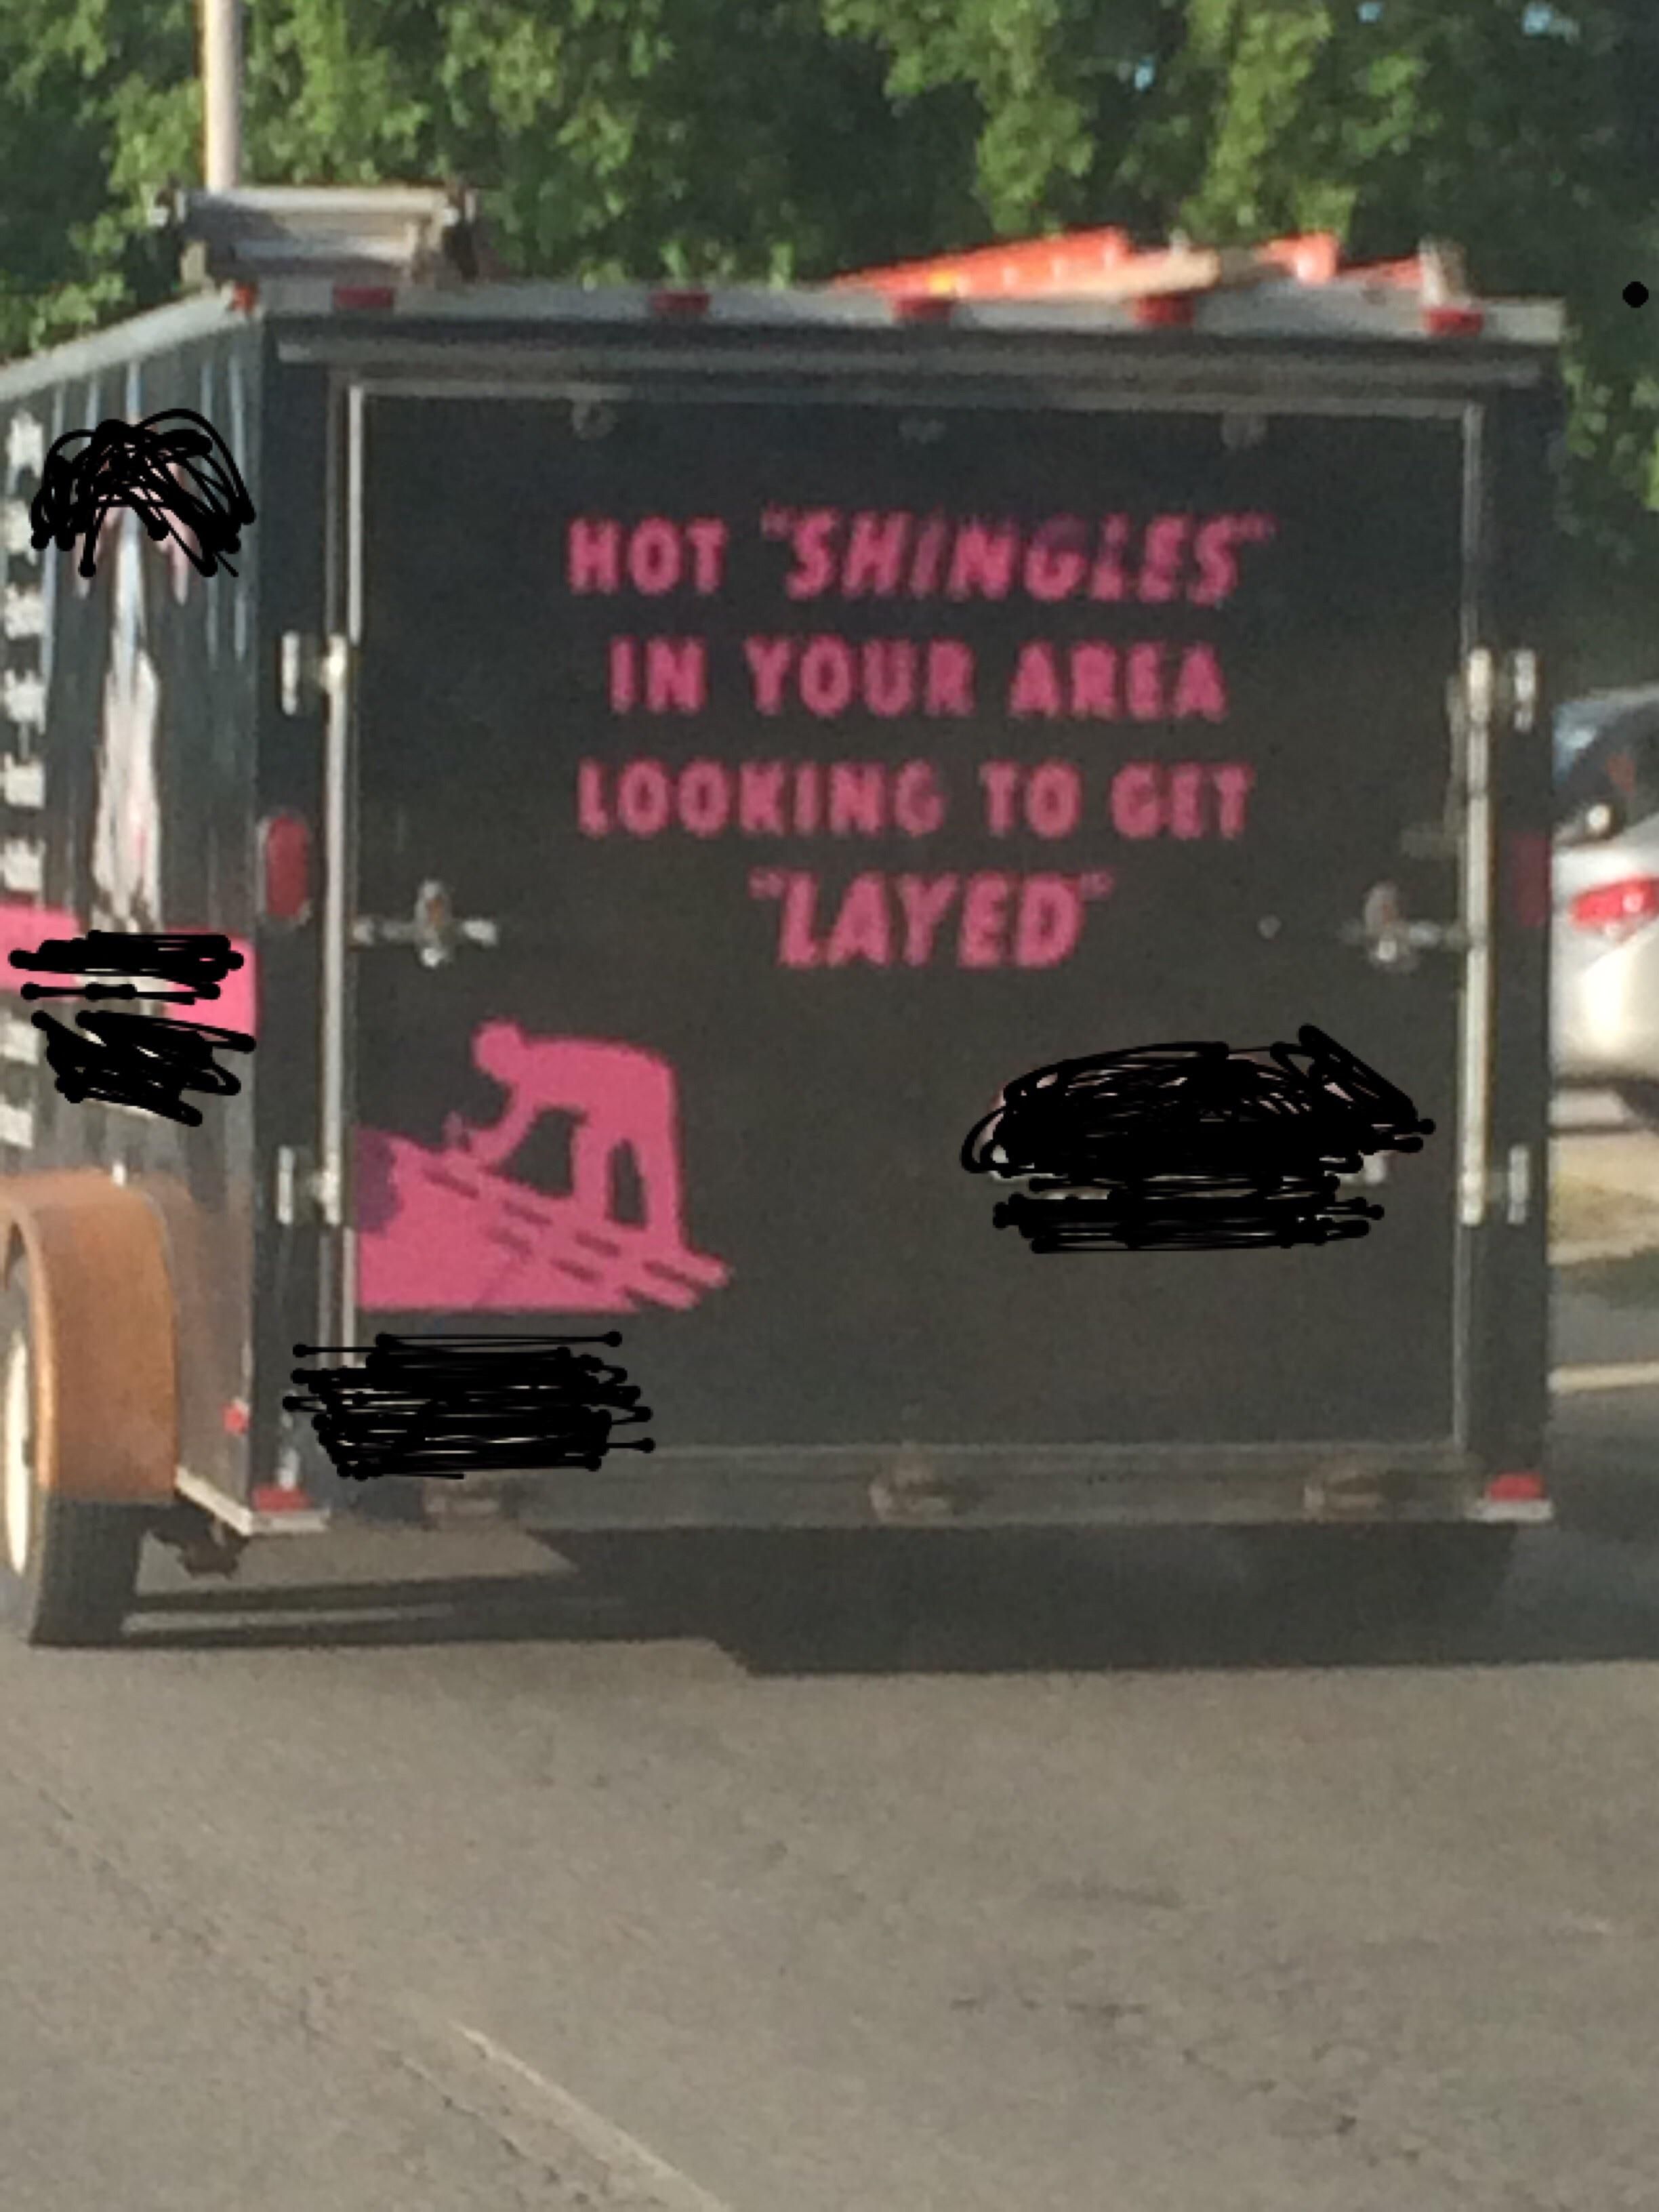 Saw this on my way home today